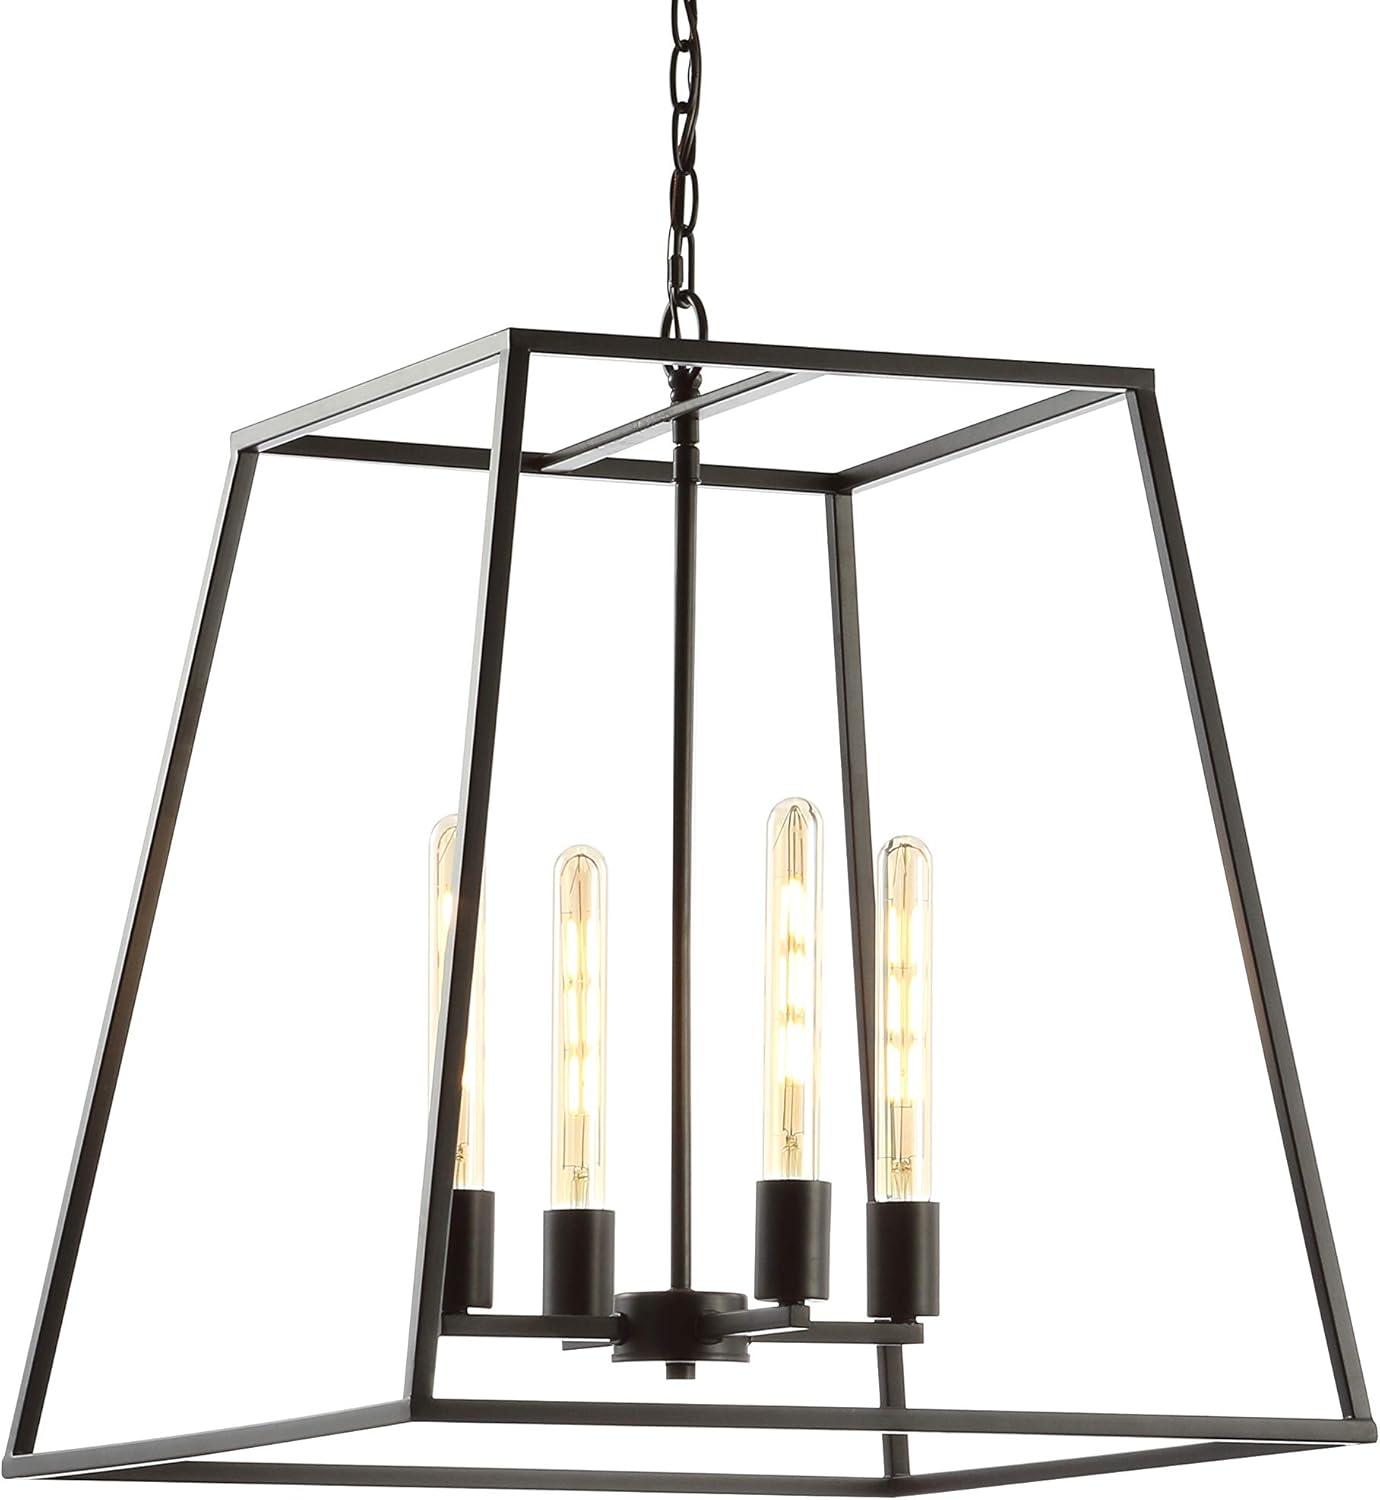 Hutson 21" Rustic French Country Cottage Oil-Rubbed Bronze LED Chandelier